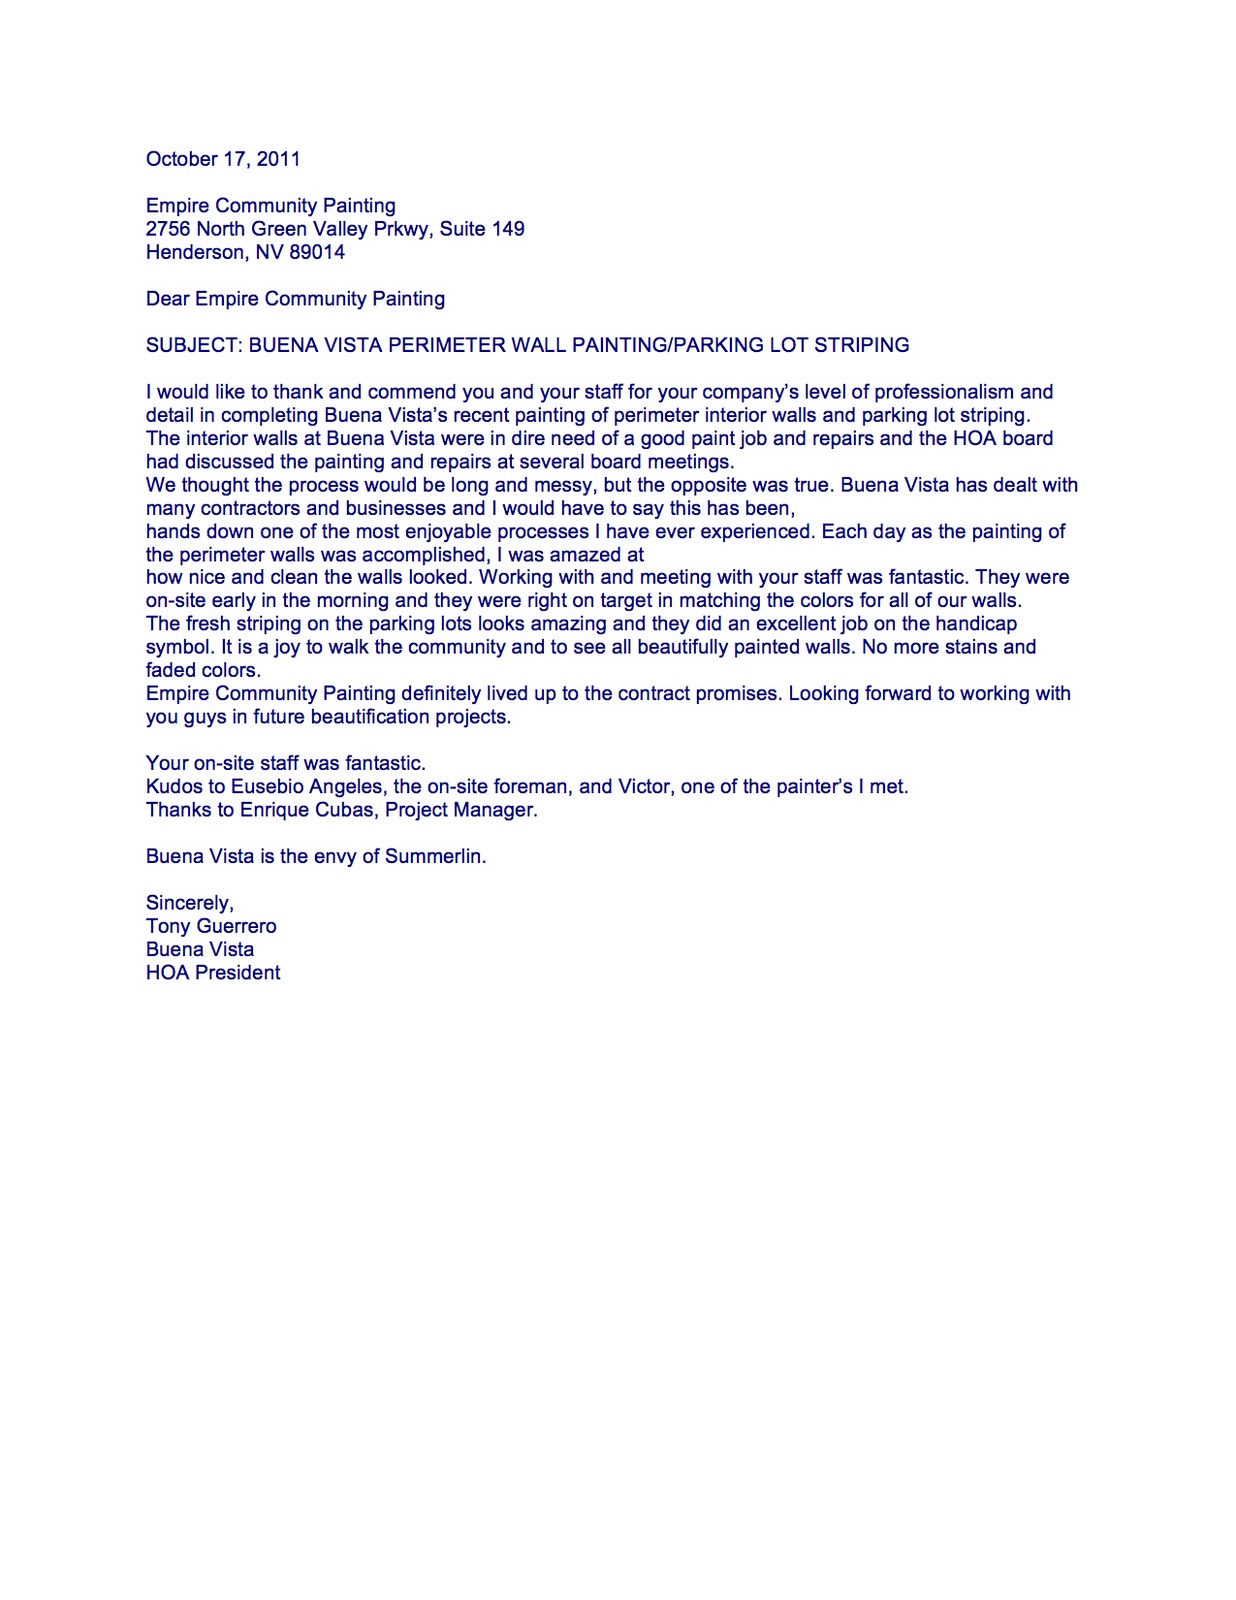 empireworks-reviews-and-resources-buena-vista-hoa-reference-letter